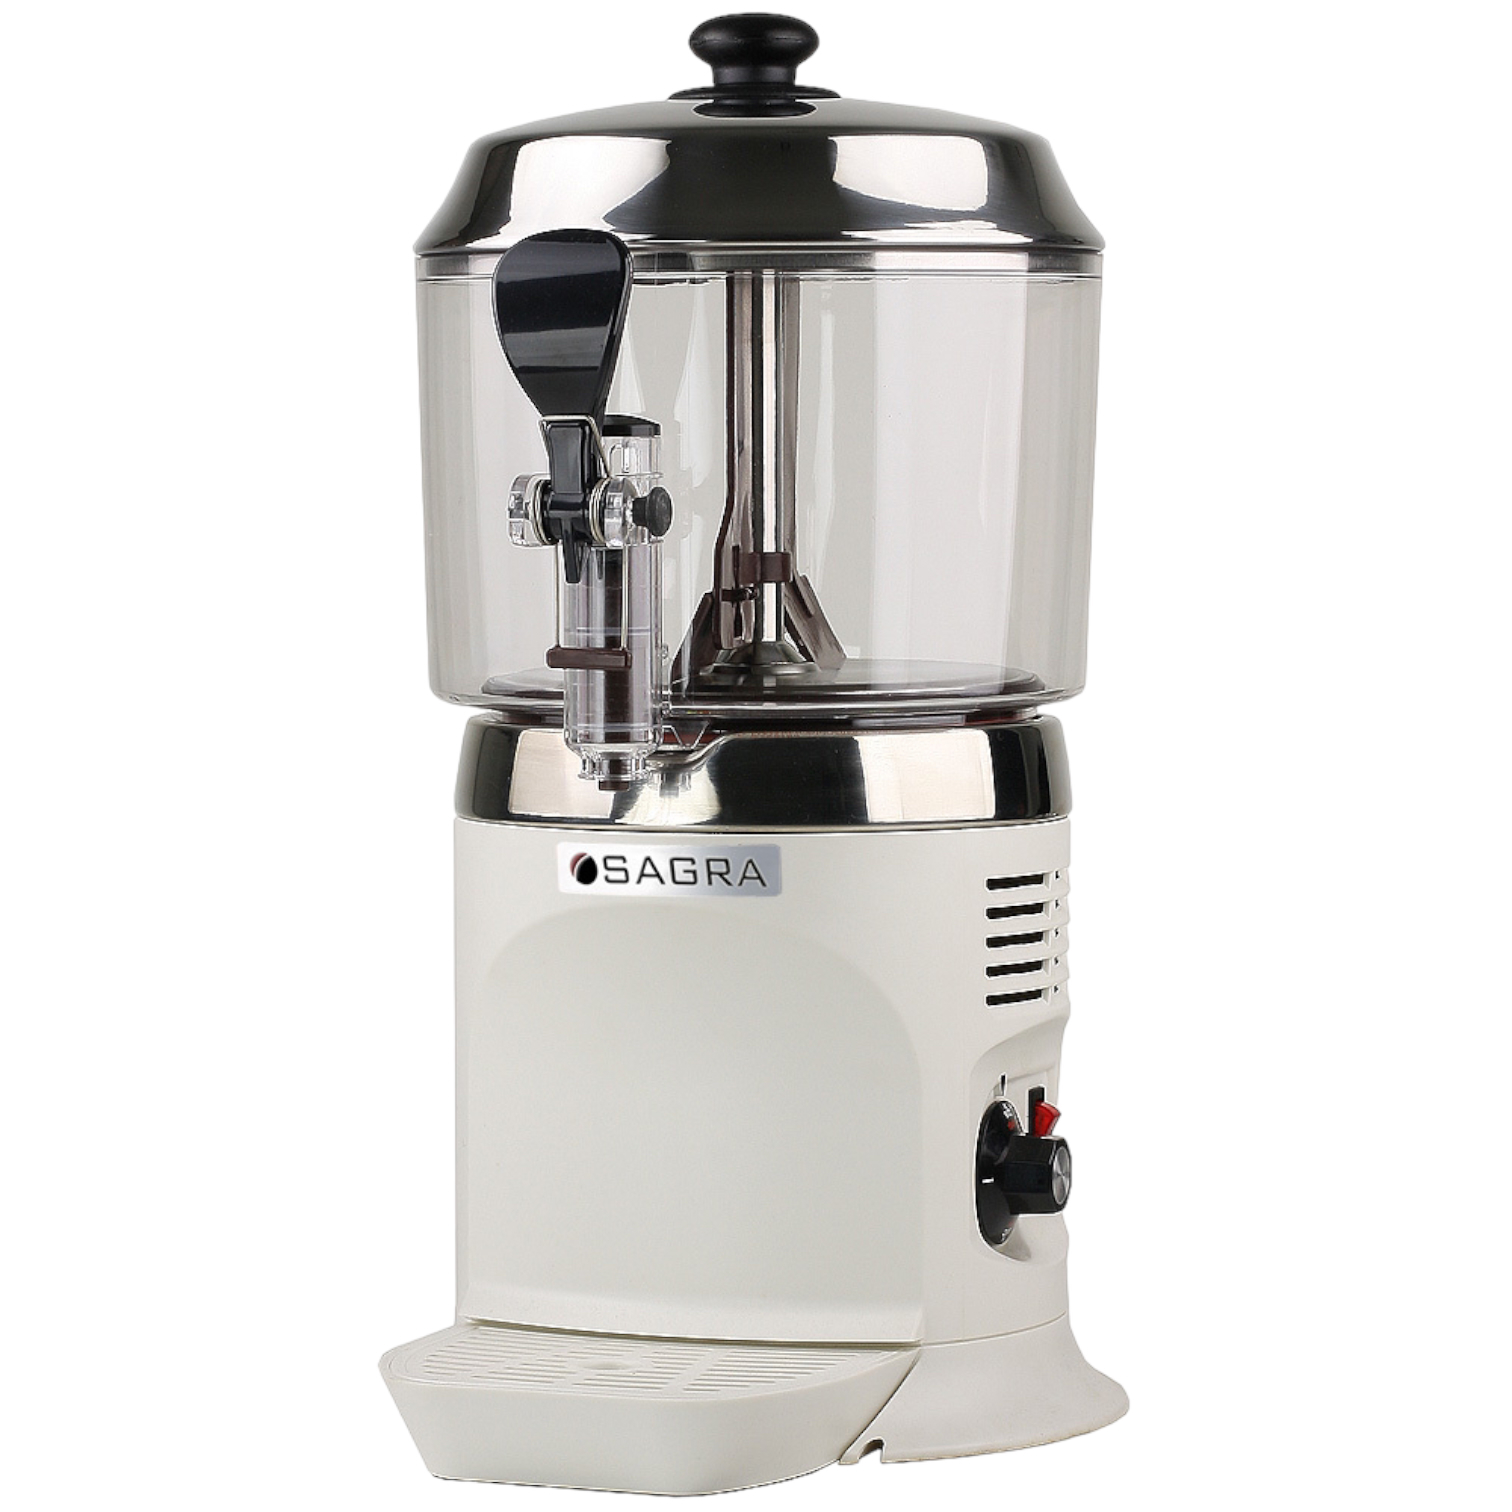 https://www.sweetfountains.com/wp-content/uploads/2020/08/Commercial-Chocolate-Dispenser-White-w-stainless-top.jpg